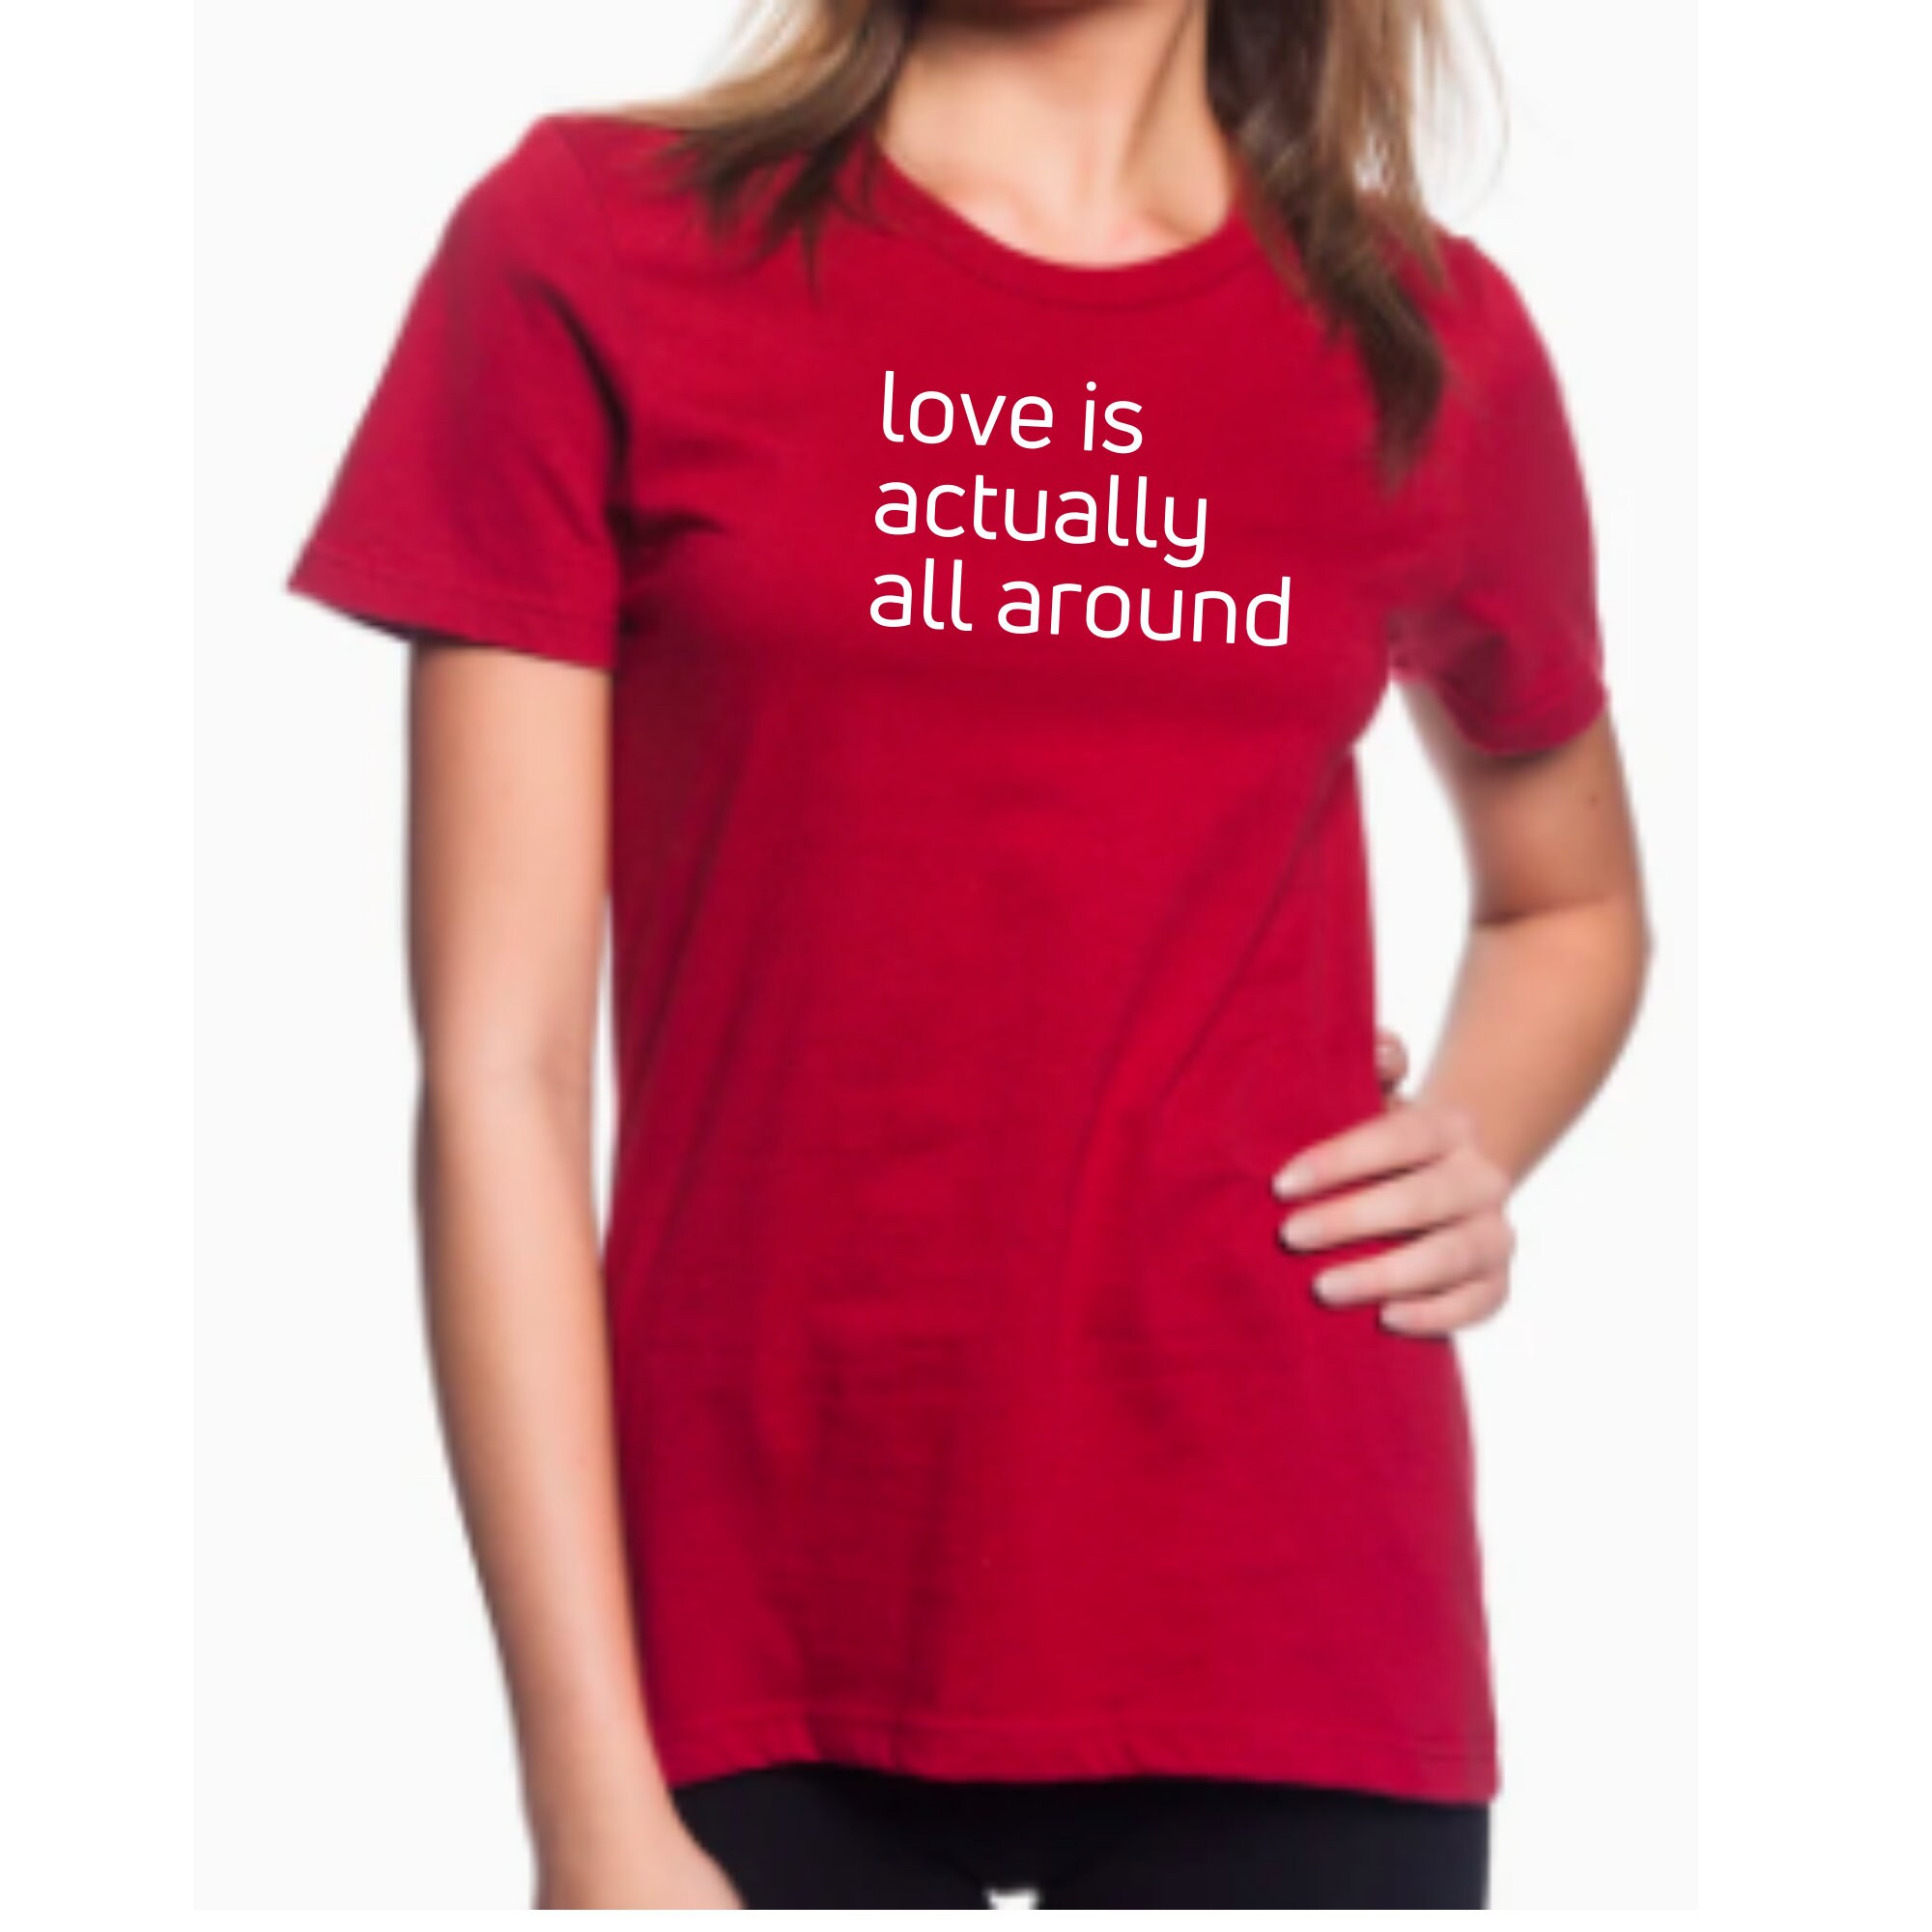 Love Actually Movie Quote Shirt - Etsy